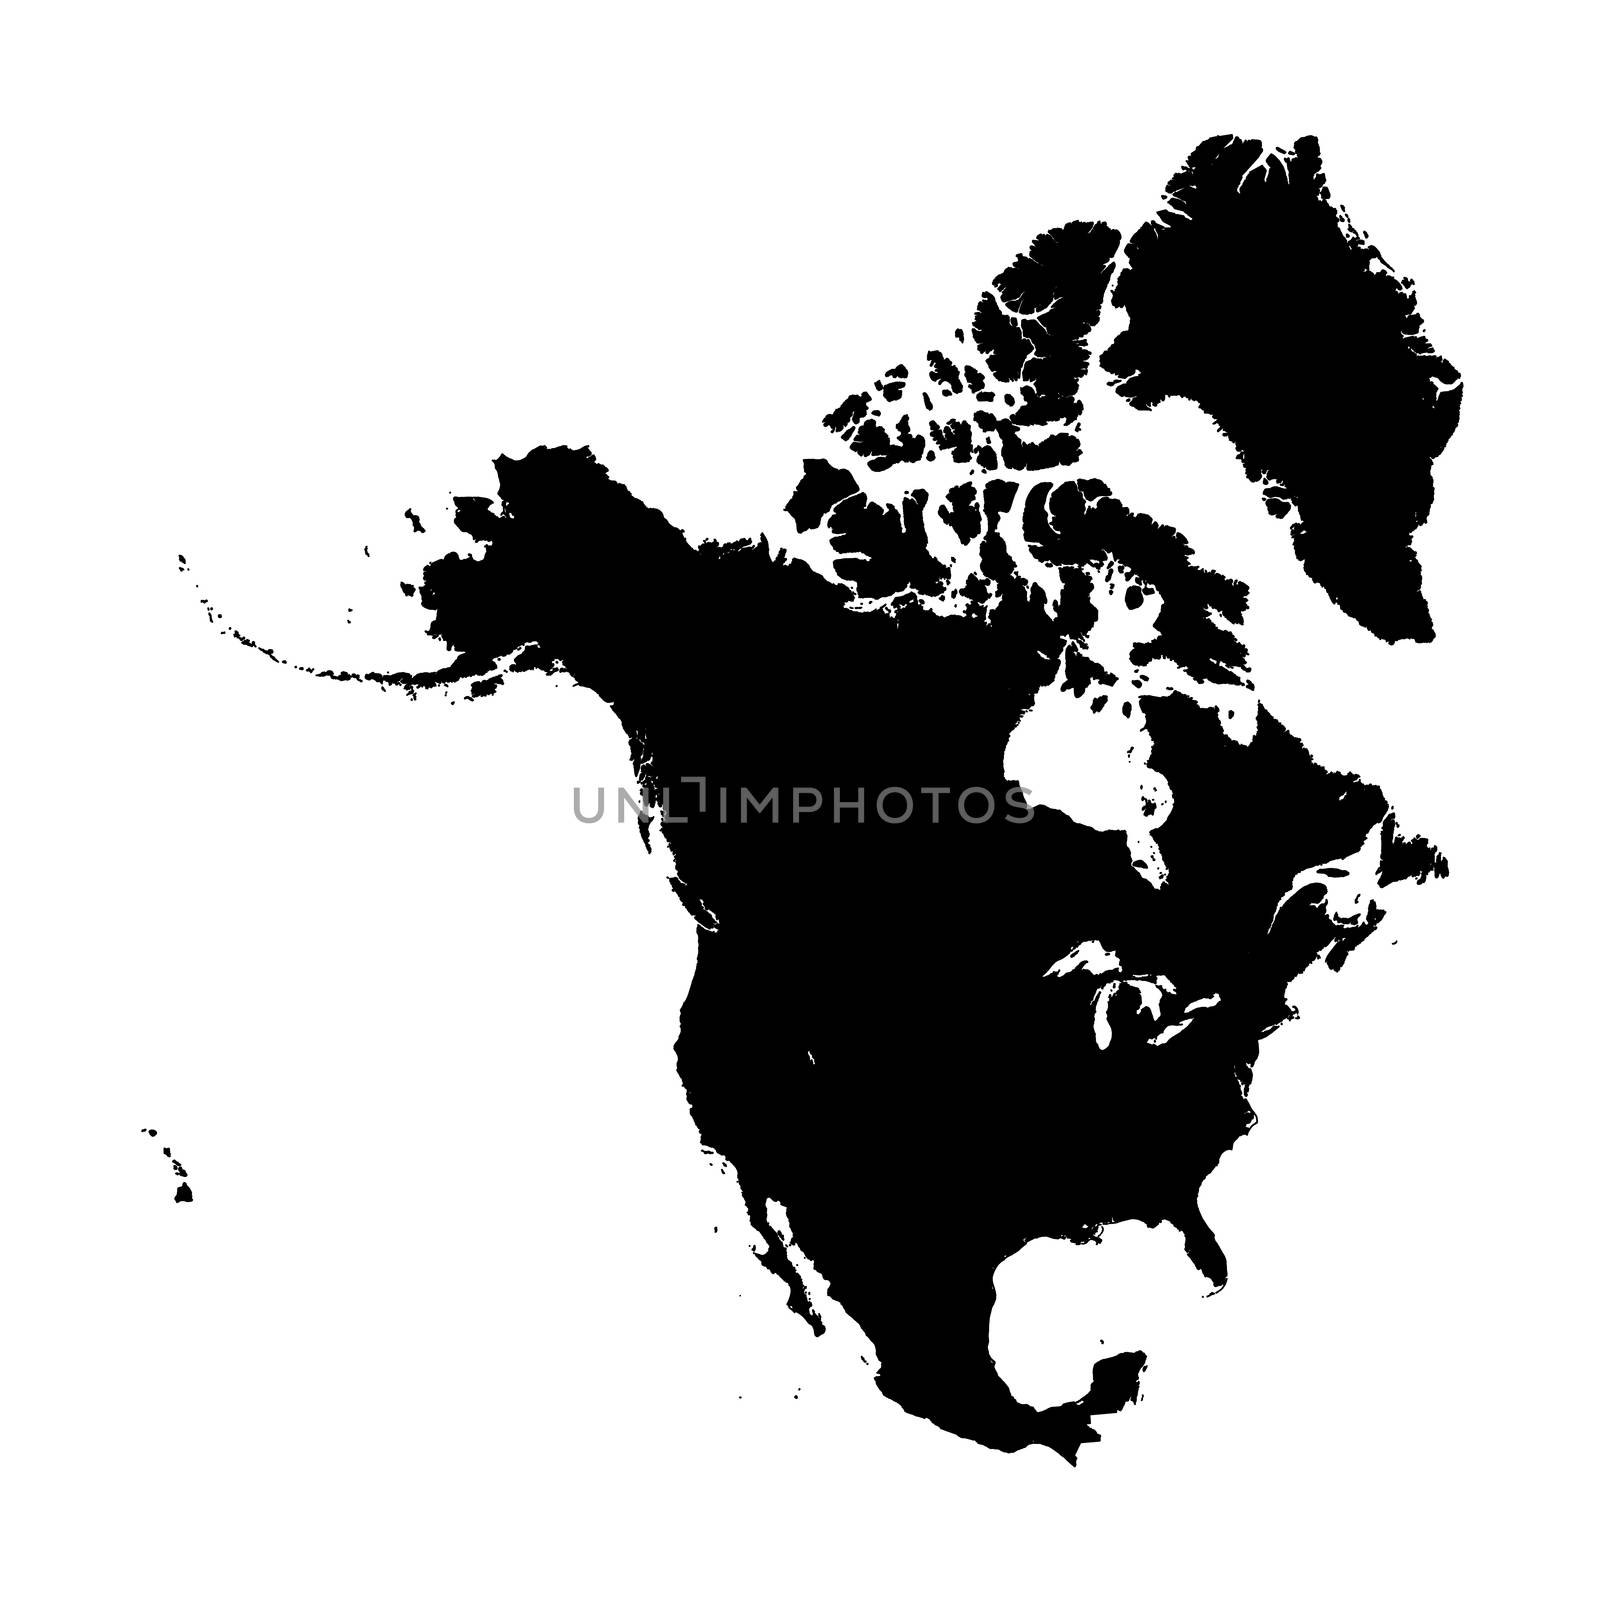 An Illustration on isolated background of the continent of North America